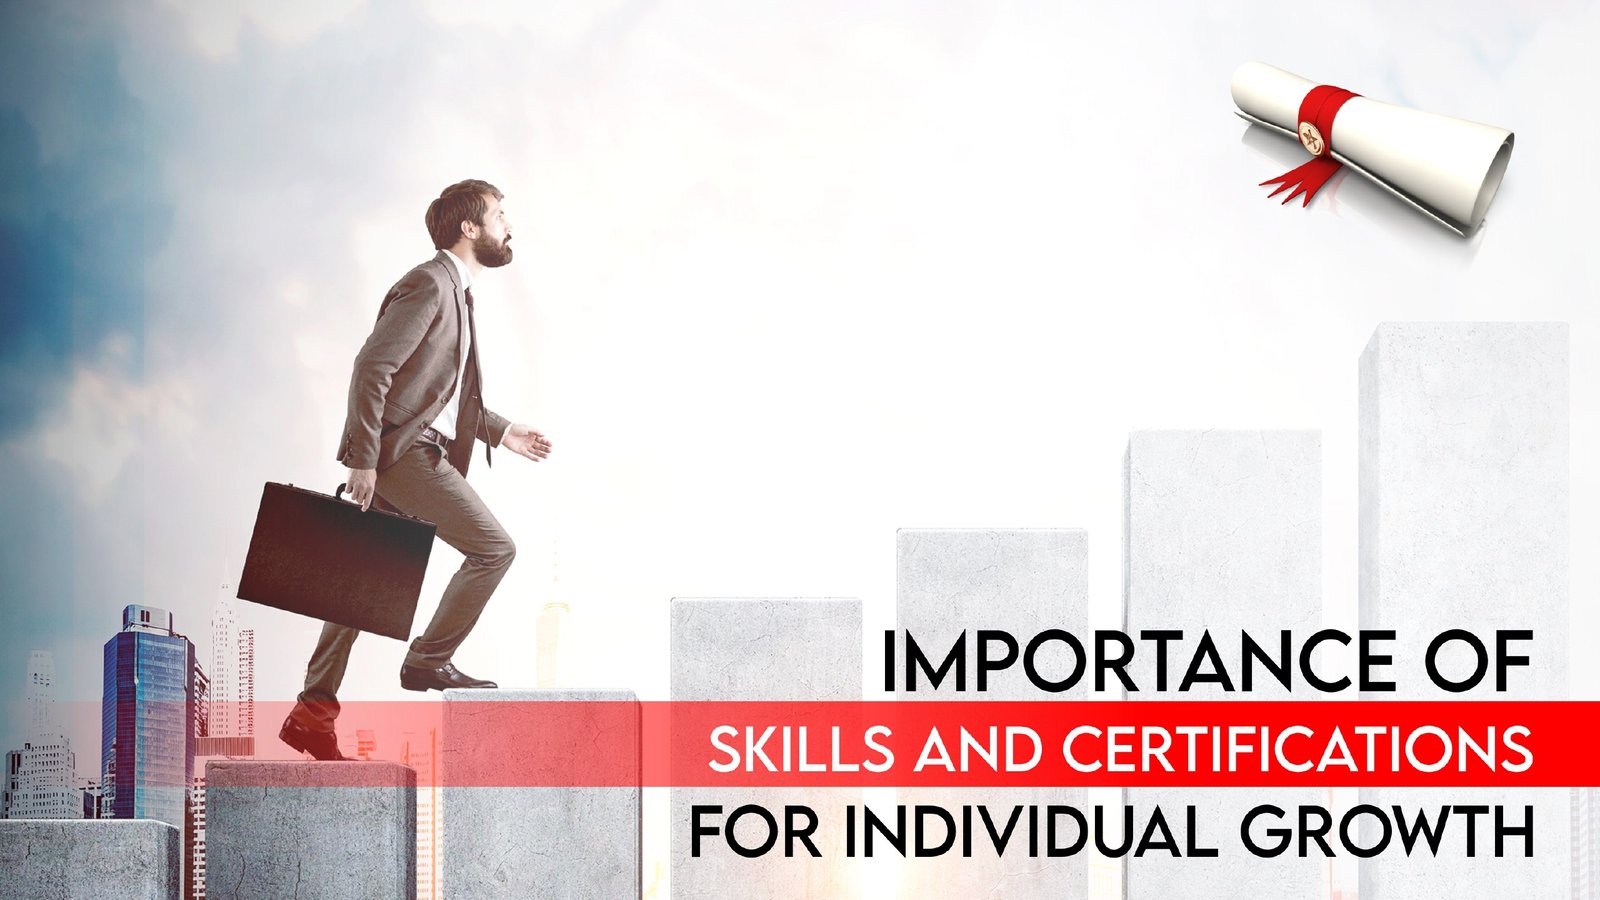 Importance of skills and certification